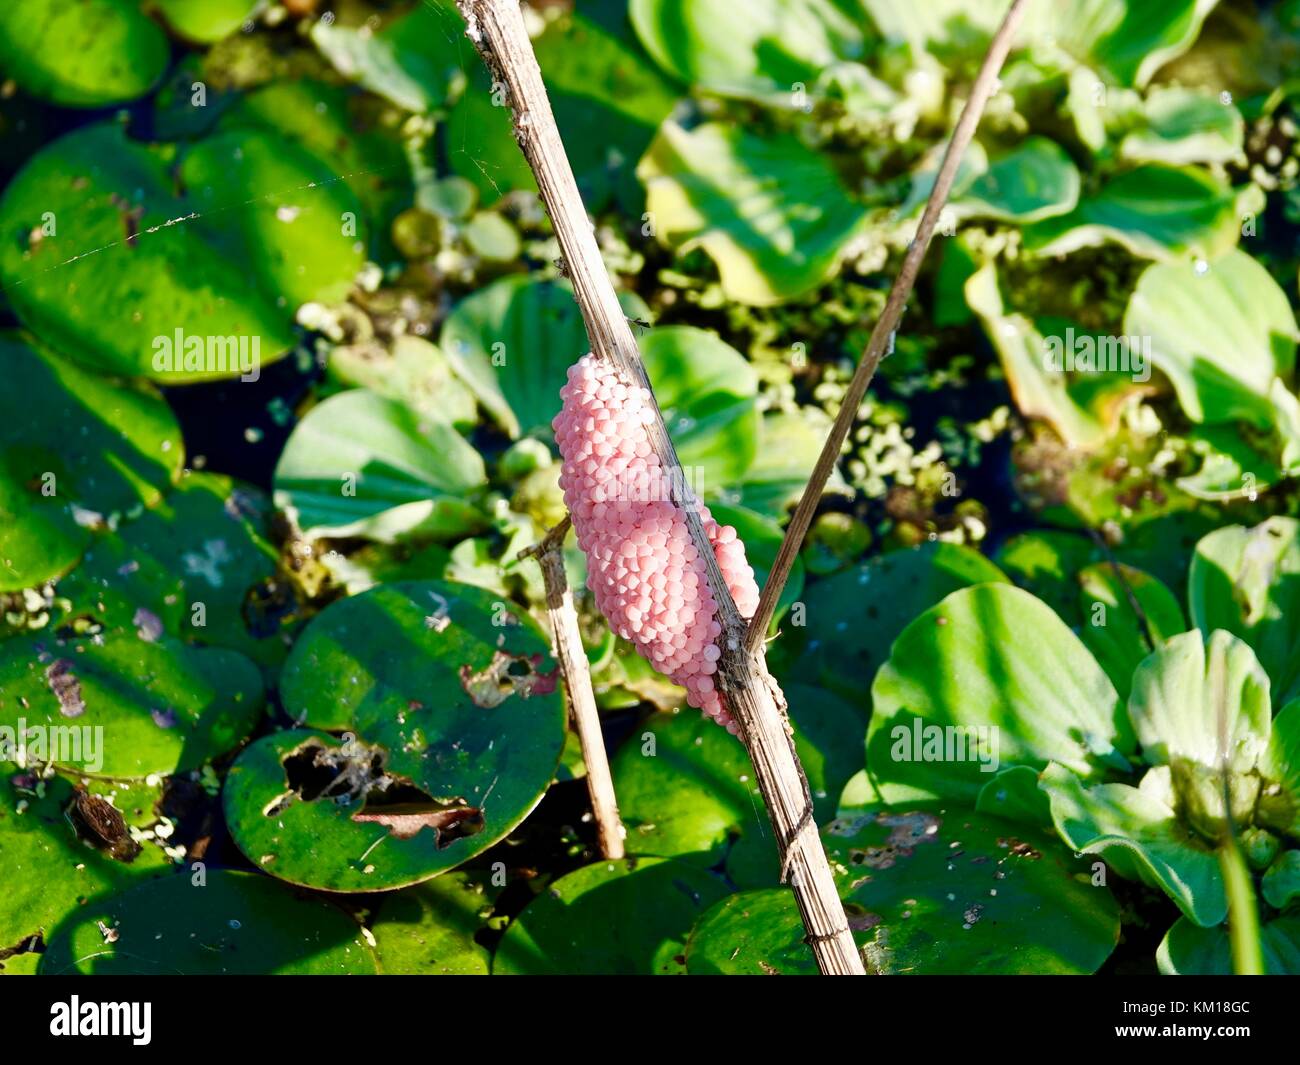 USA, Florida, Gainesville. Applesnails, Pomacea maculata, cluster of pink snail eggs on branch, swampy area of Paynes Prairie Preserve State Park. Stock Photo